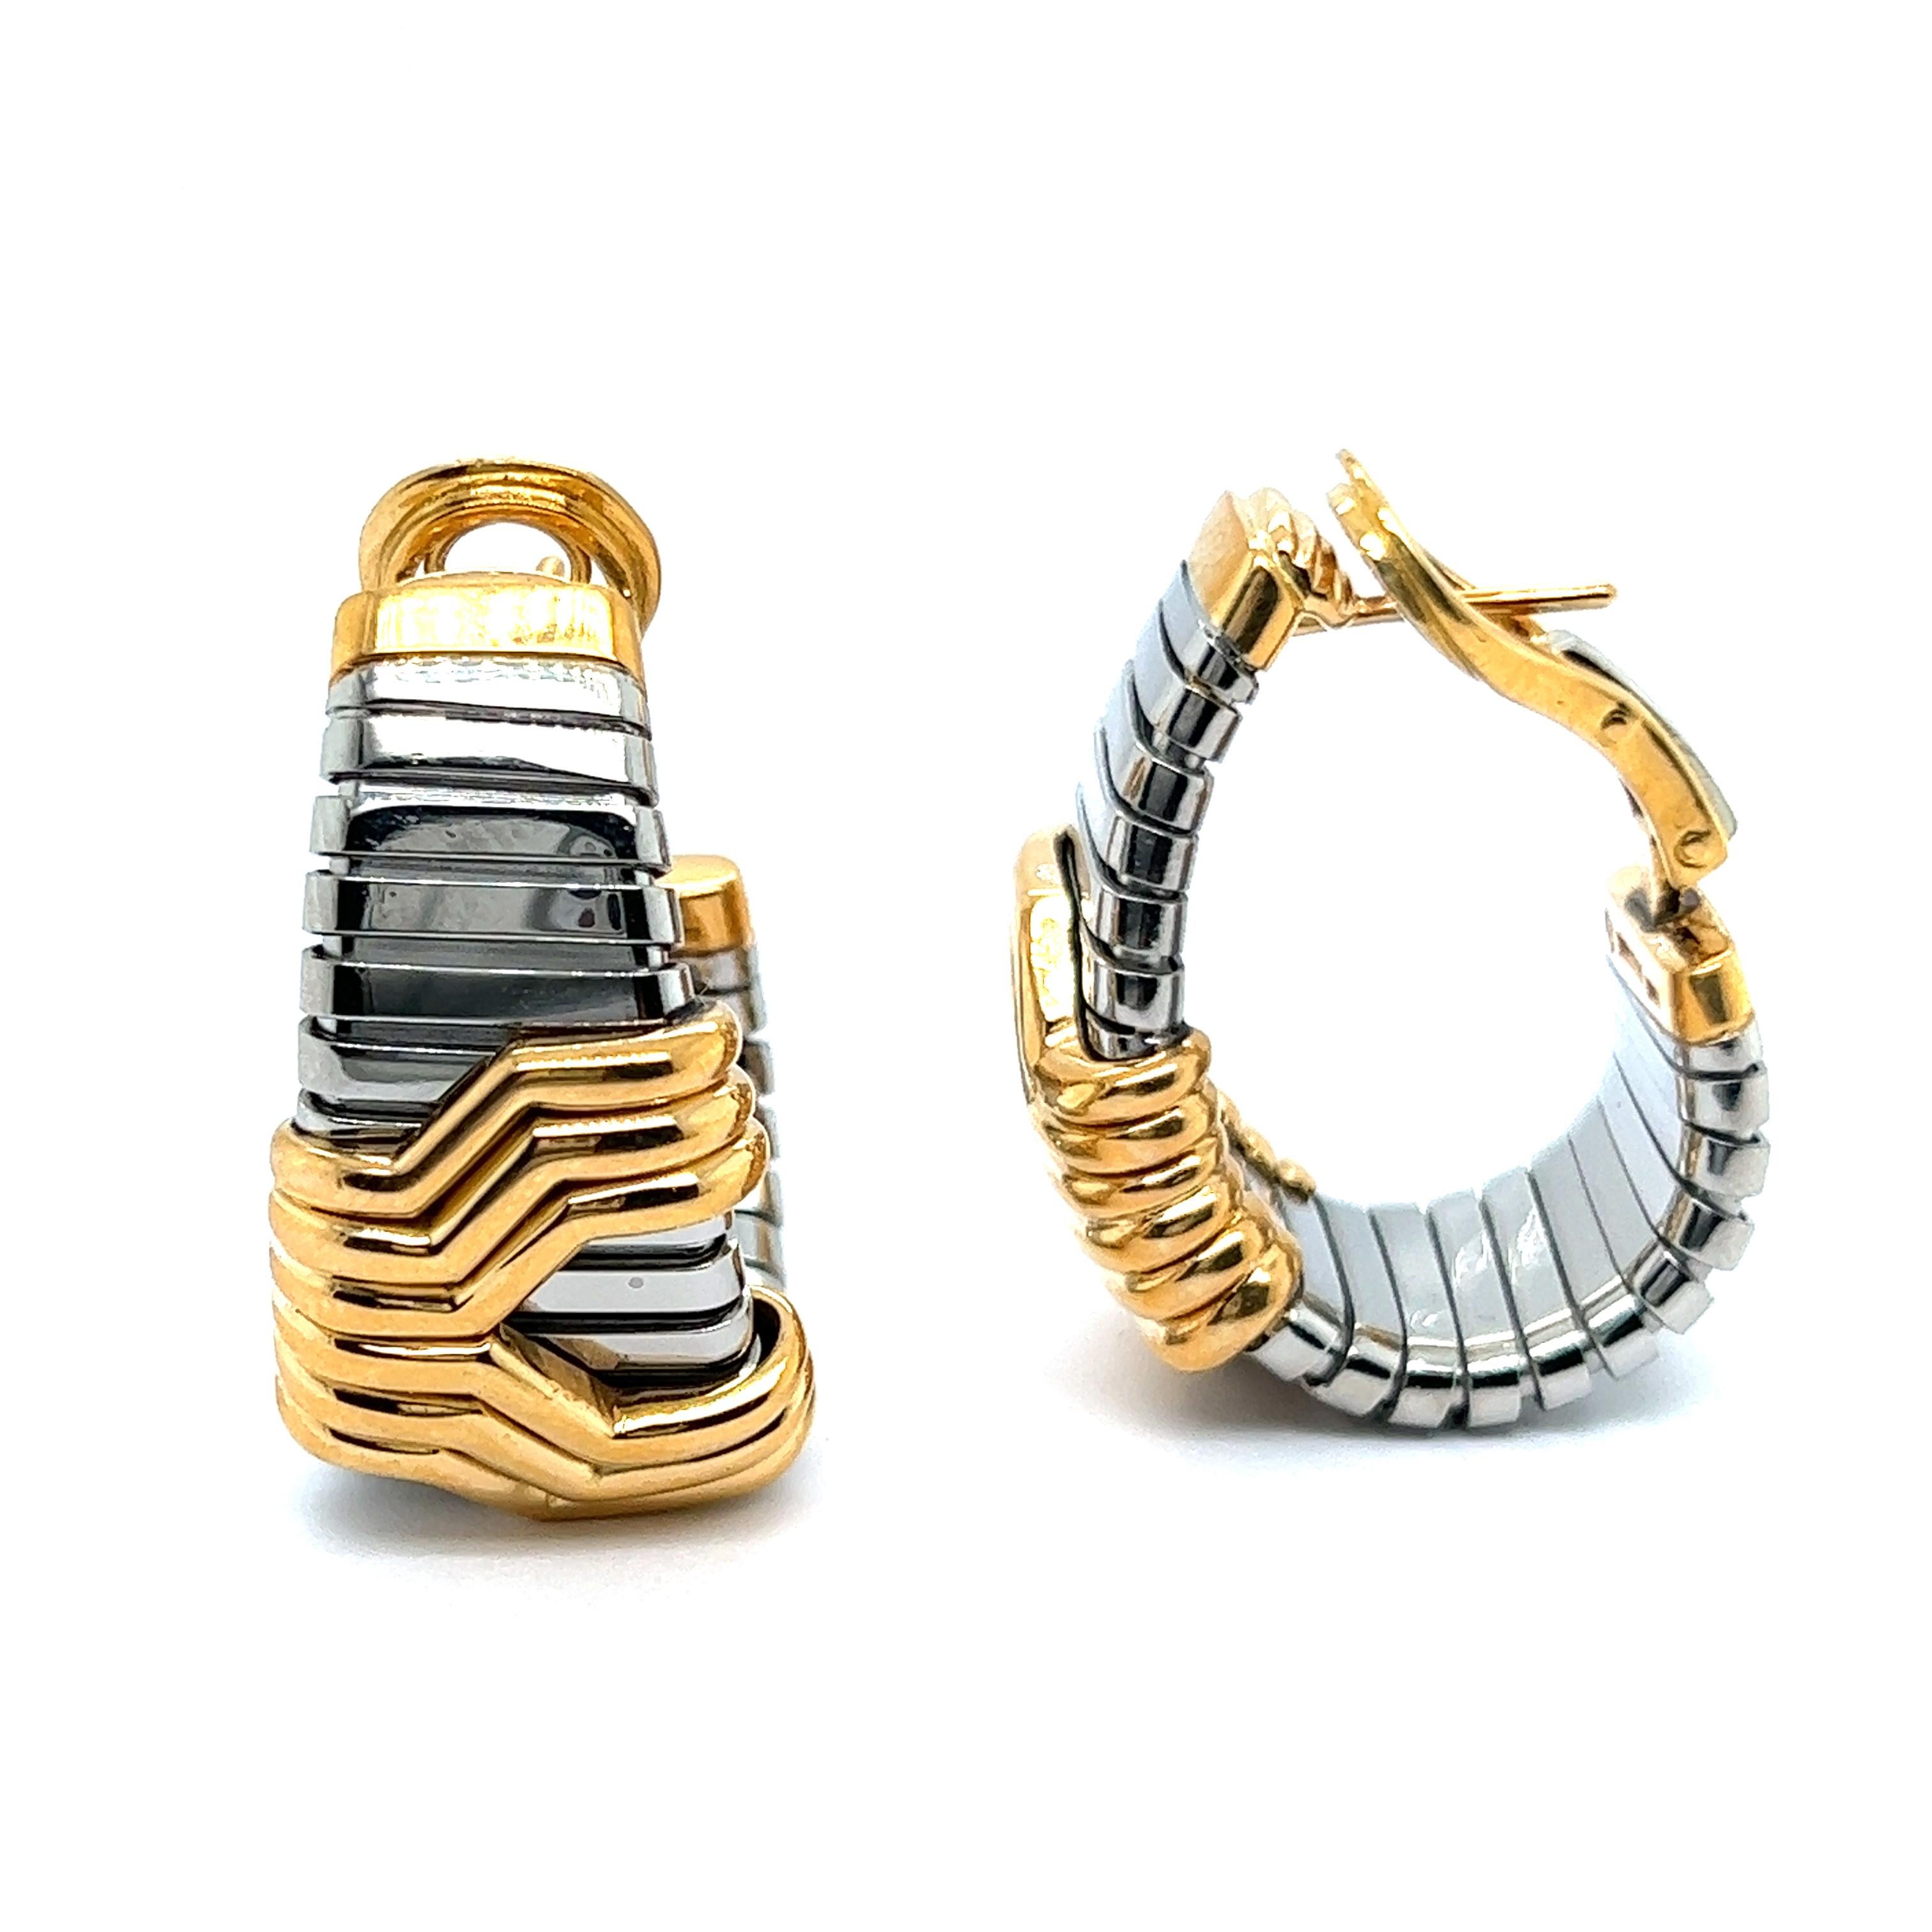 A fine pair of Bvlgari hoop earrings in a 'Parentesi' pattern, inspired by the eternal city of Rome. 
Crafted from 18K gold and stainless steel, collection is an embodiment for modern сhic and elegance. 

This iconic piece was manufactured in Italy